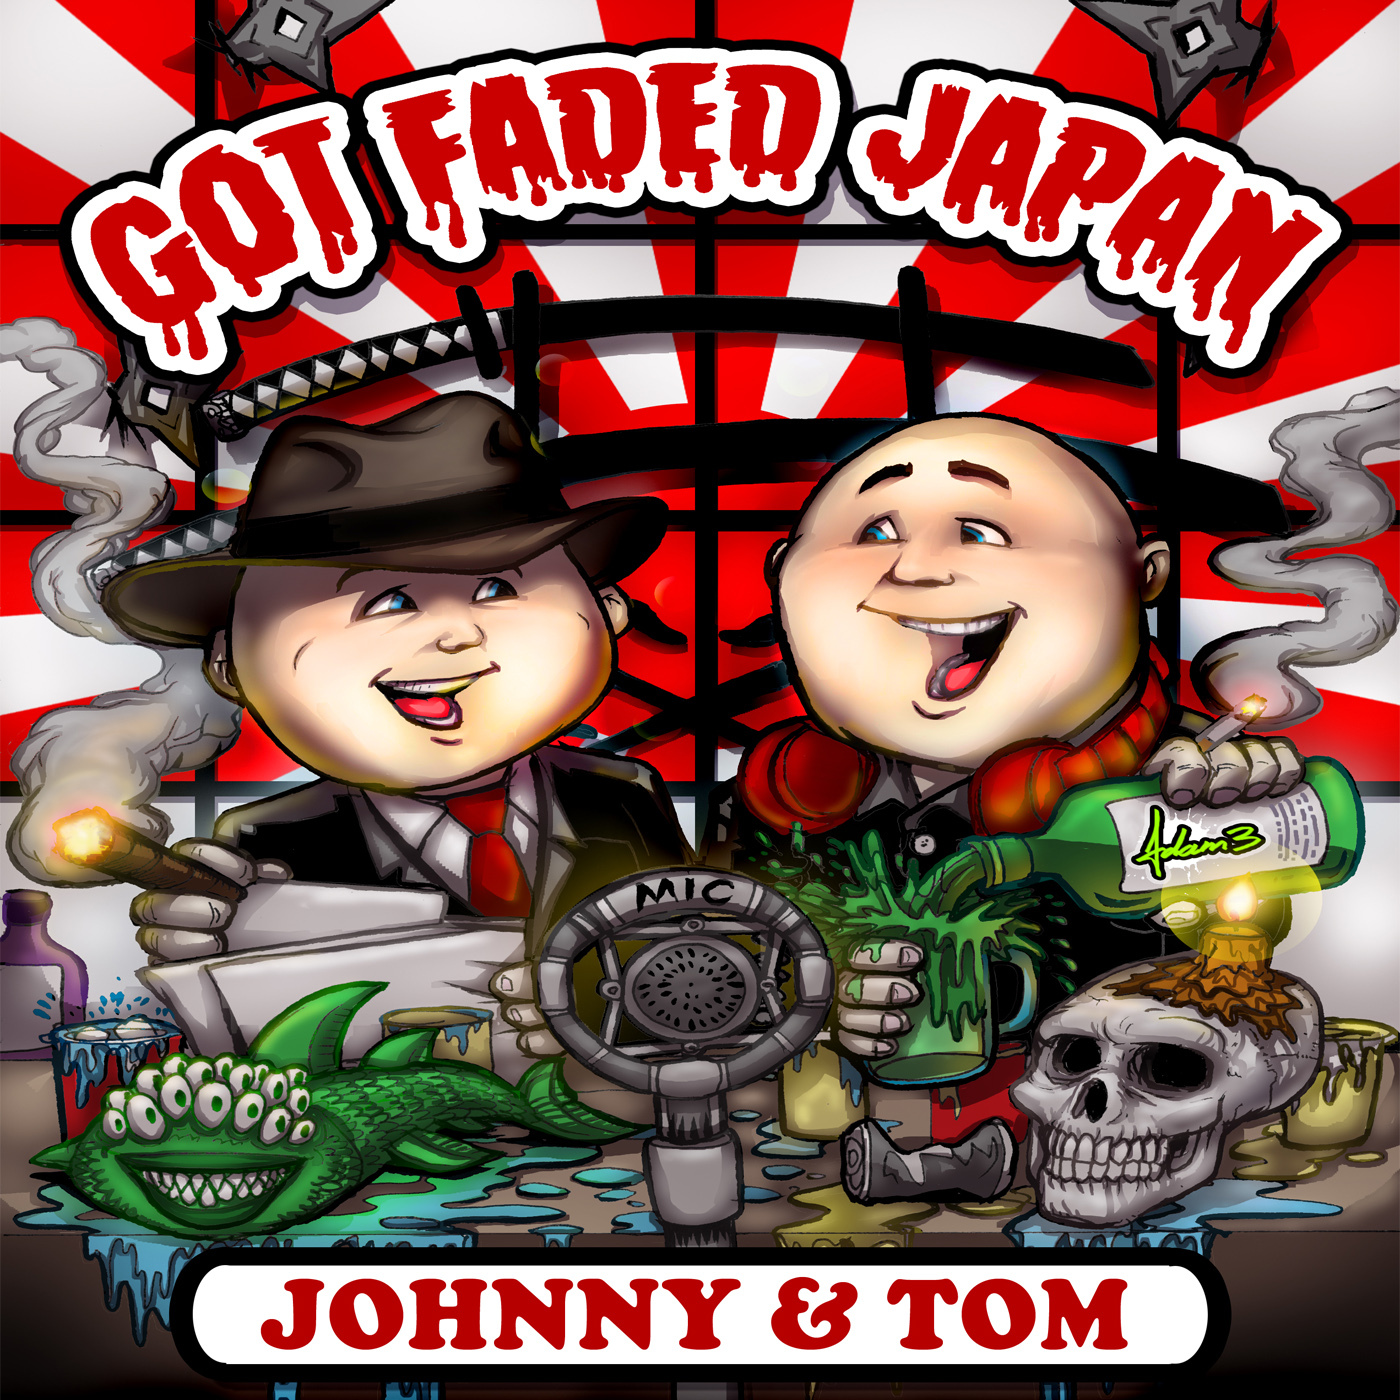 Got Faded Japan ep 367. The Tracks of Tokyo Underground...